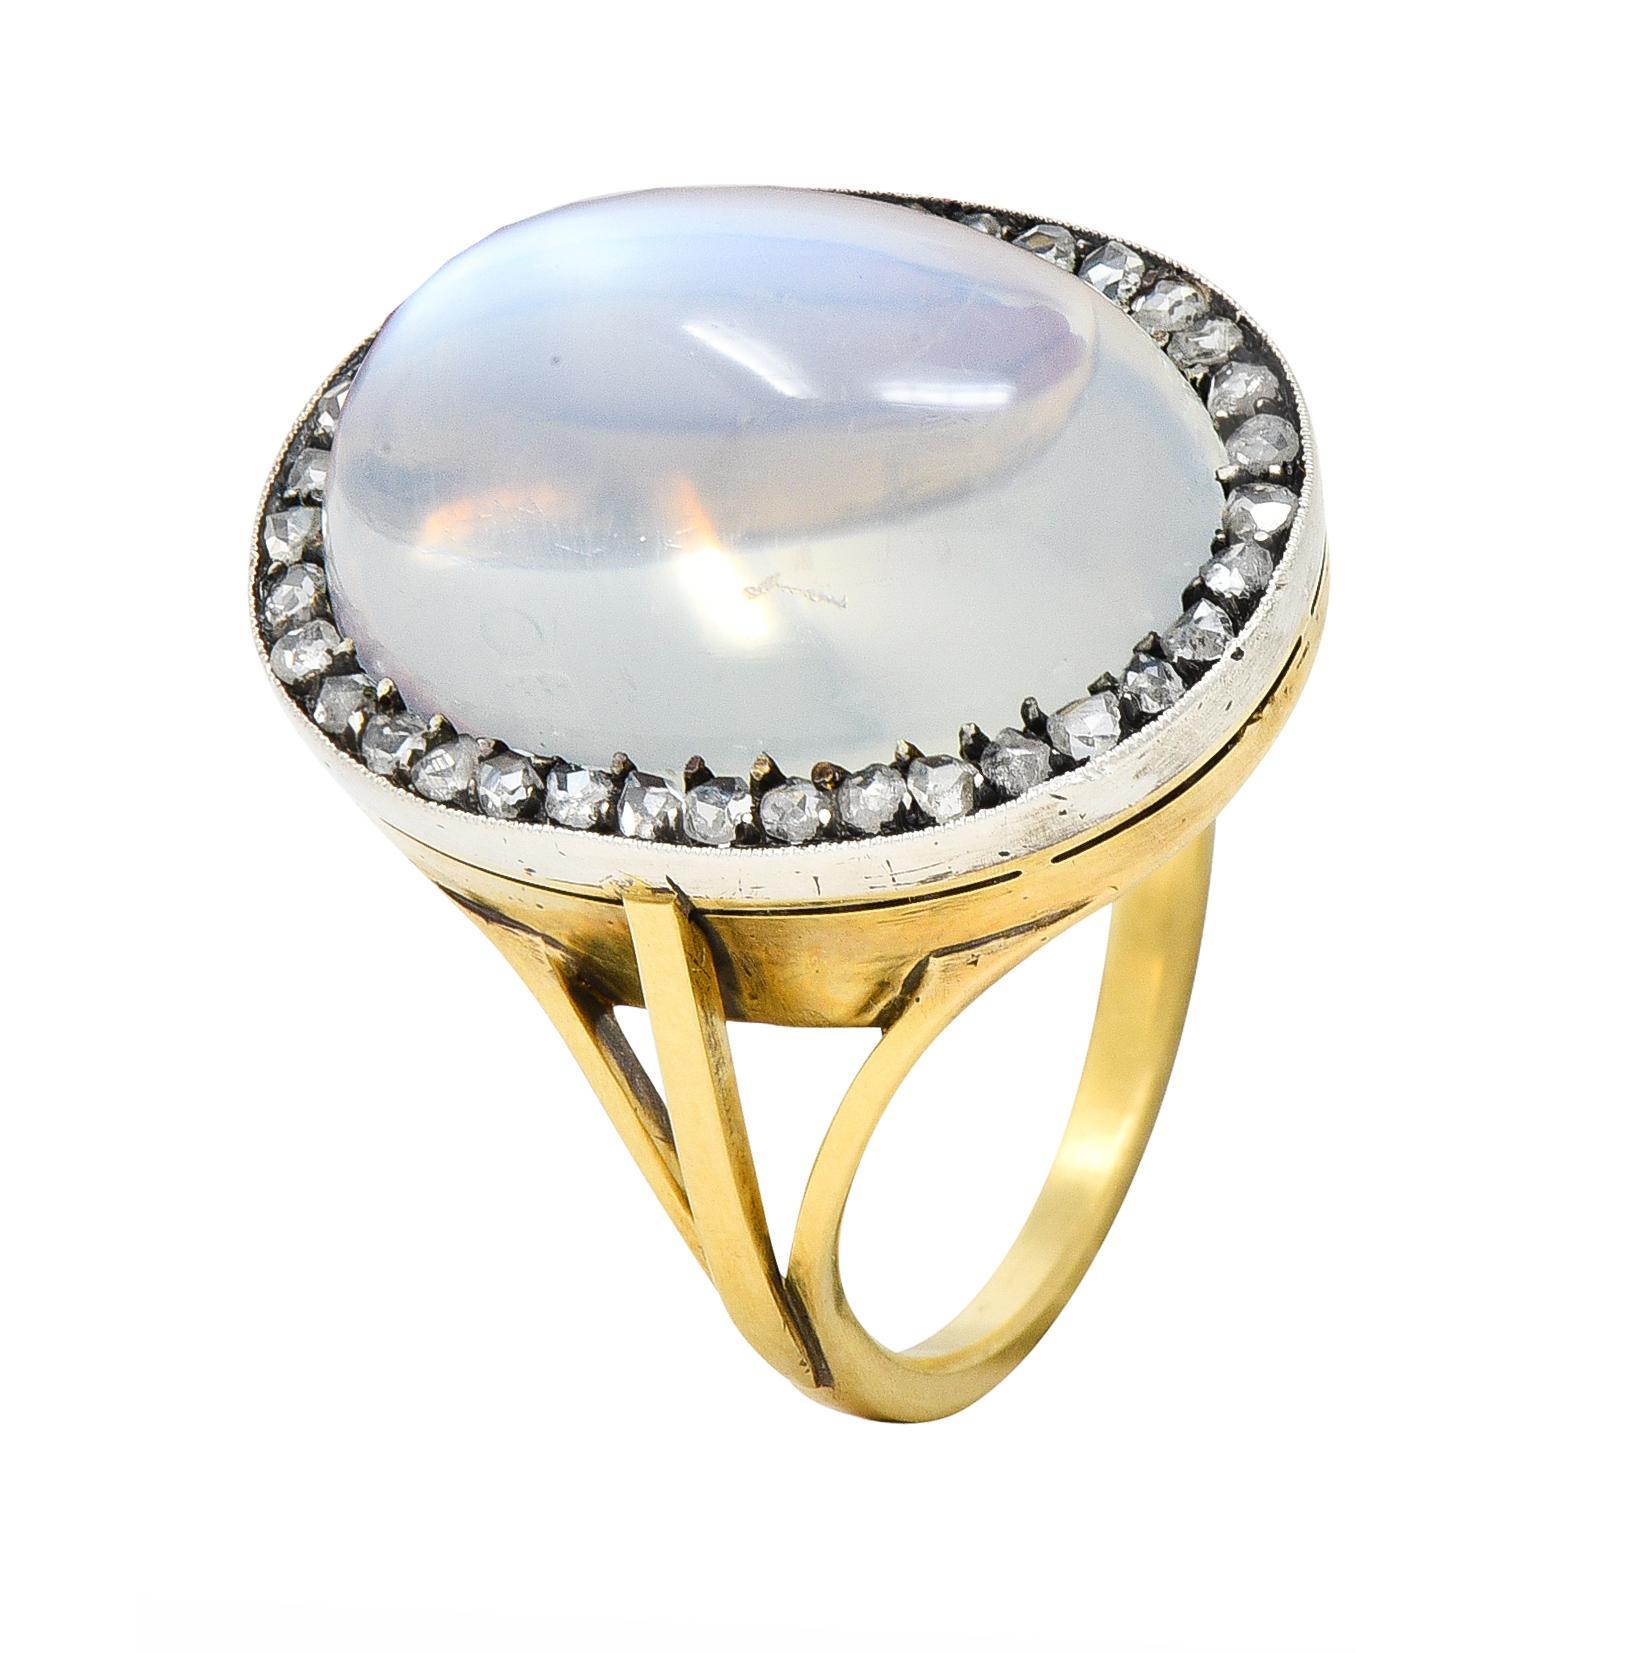 Centering an oval-shaped moonstone cabochon measuring 11.5 x 17.0 mm 
Translucent colorless body with vivid blue adularescence 
Prong set in silver with a halo surround of rose cut diamonds 
Bead set and weighing approximately 0.36 carat total